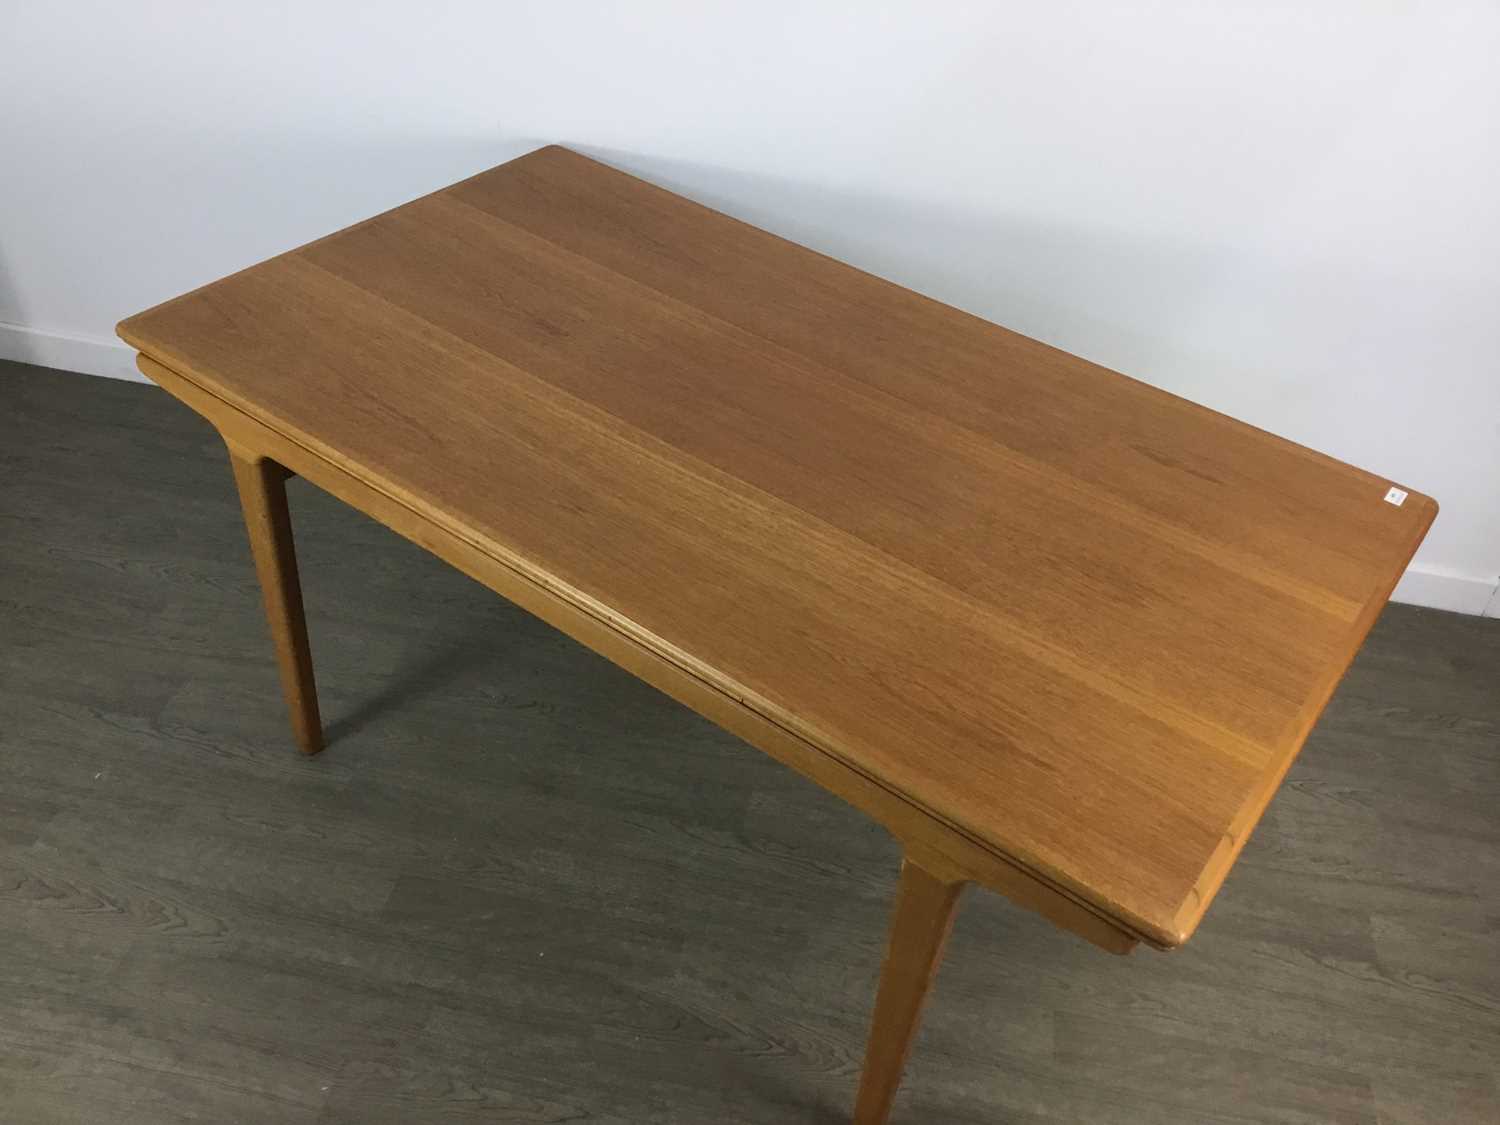 MID CENTURY DANISH TEAK DRAW LEAF EXTENDING DINING TABLE, WITH SIX DINING CHAIRS - Image 2 of 4